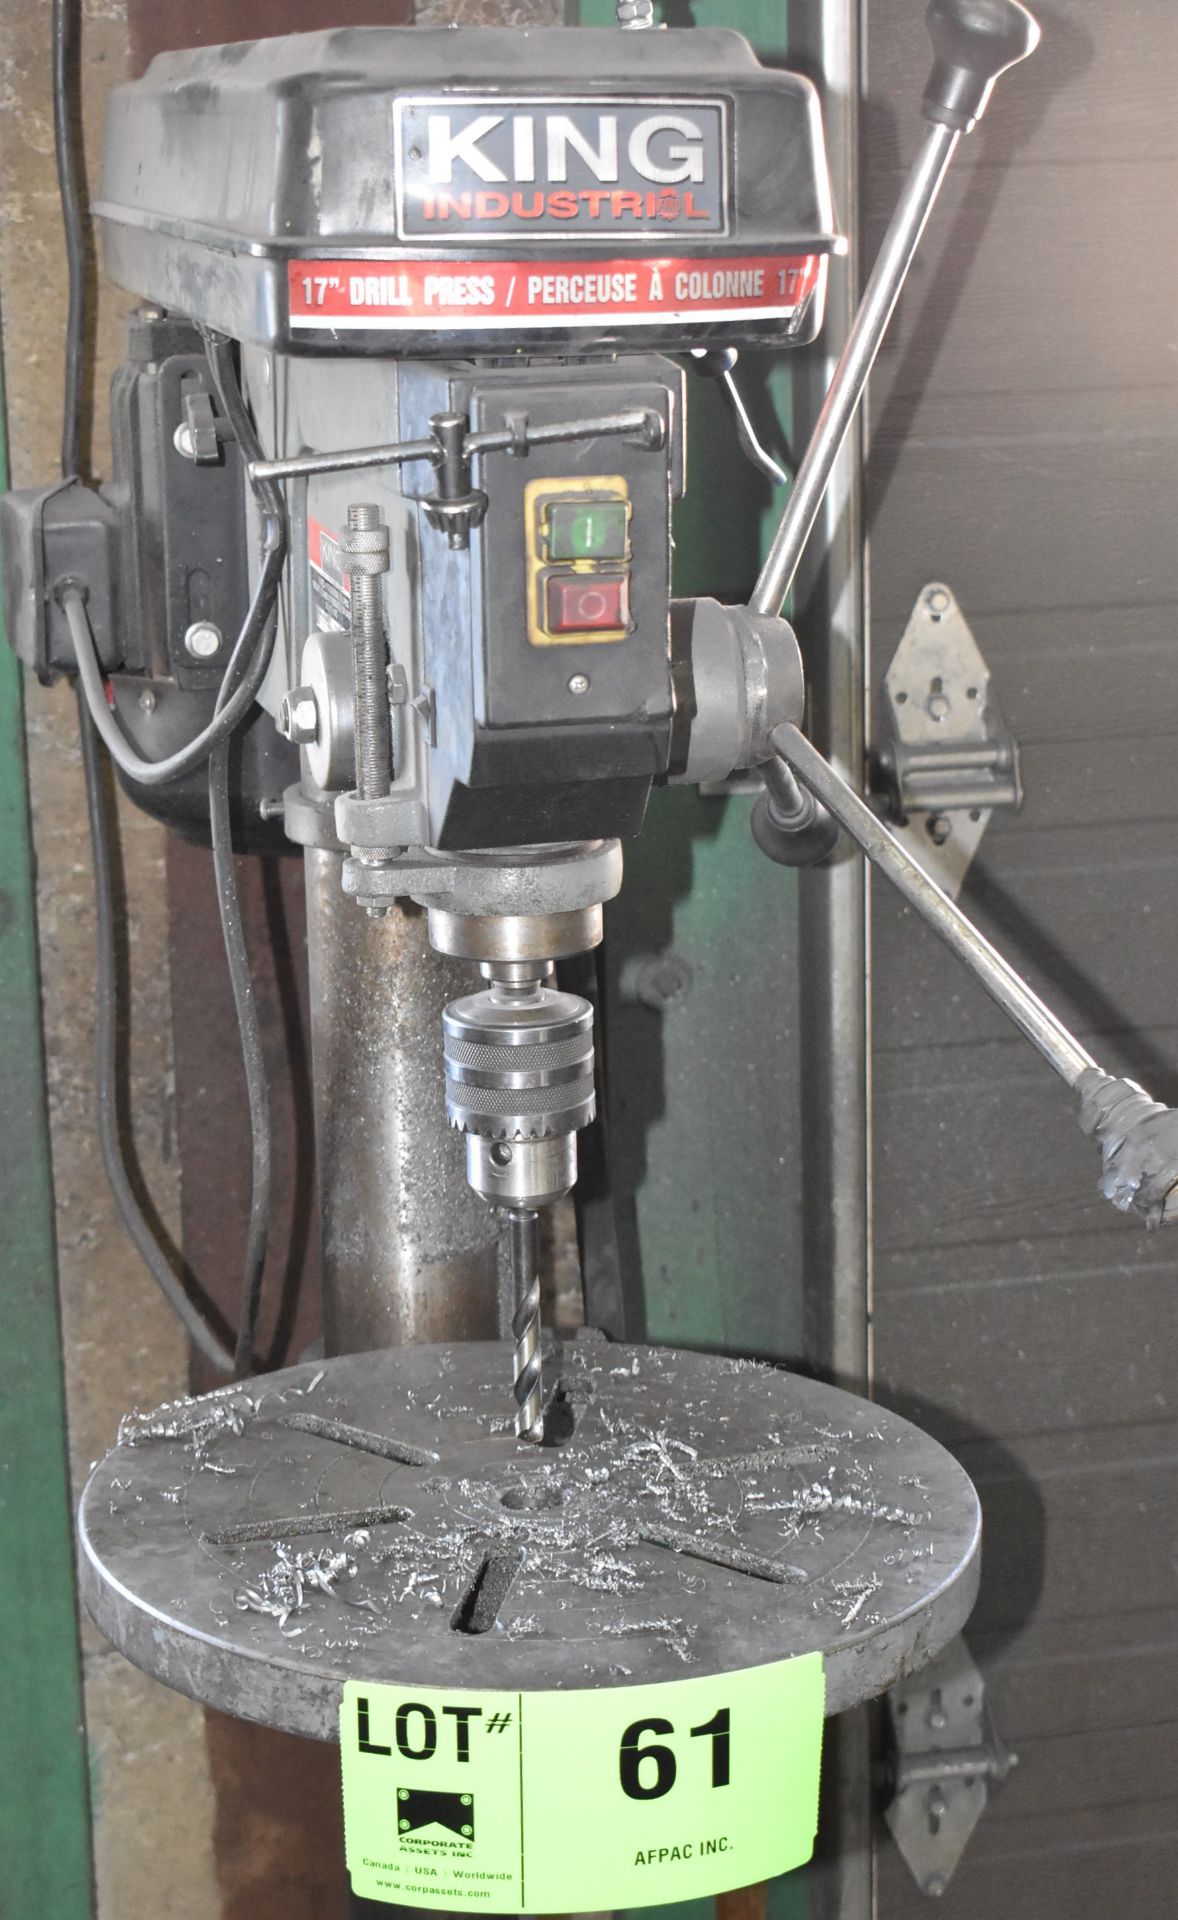 KING INDUSTRIAL (2015) KC-118FC 16-SPEED 17" FLOOR-TYPE DRILL PRESS WITH MT#2 SPINDLE, S/N 548215 - Image 2 of 5